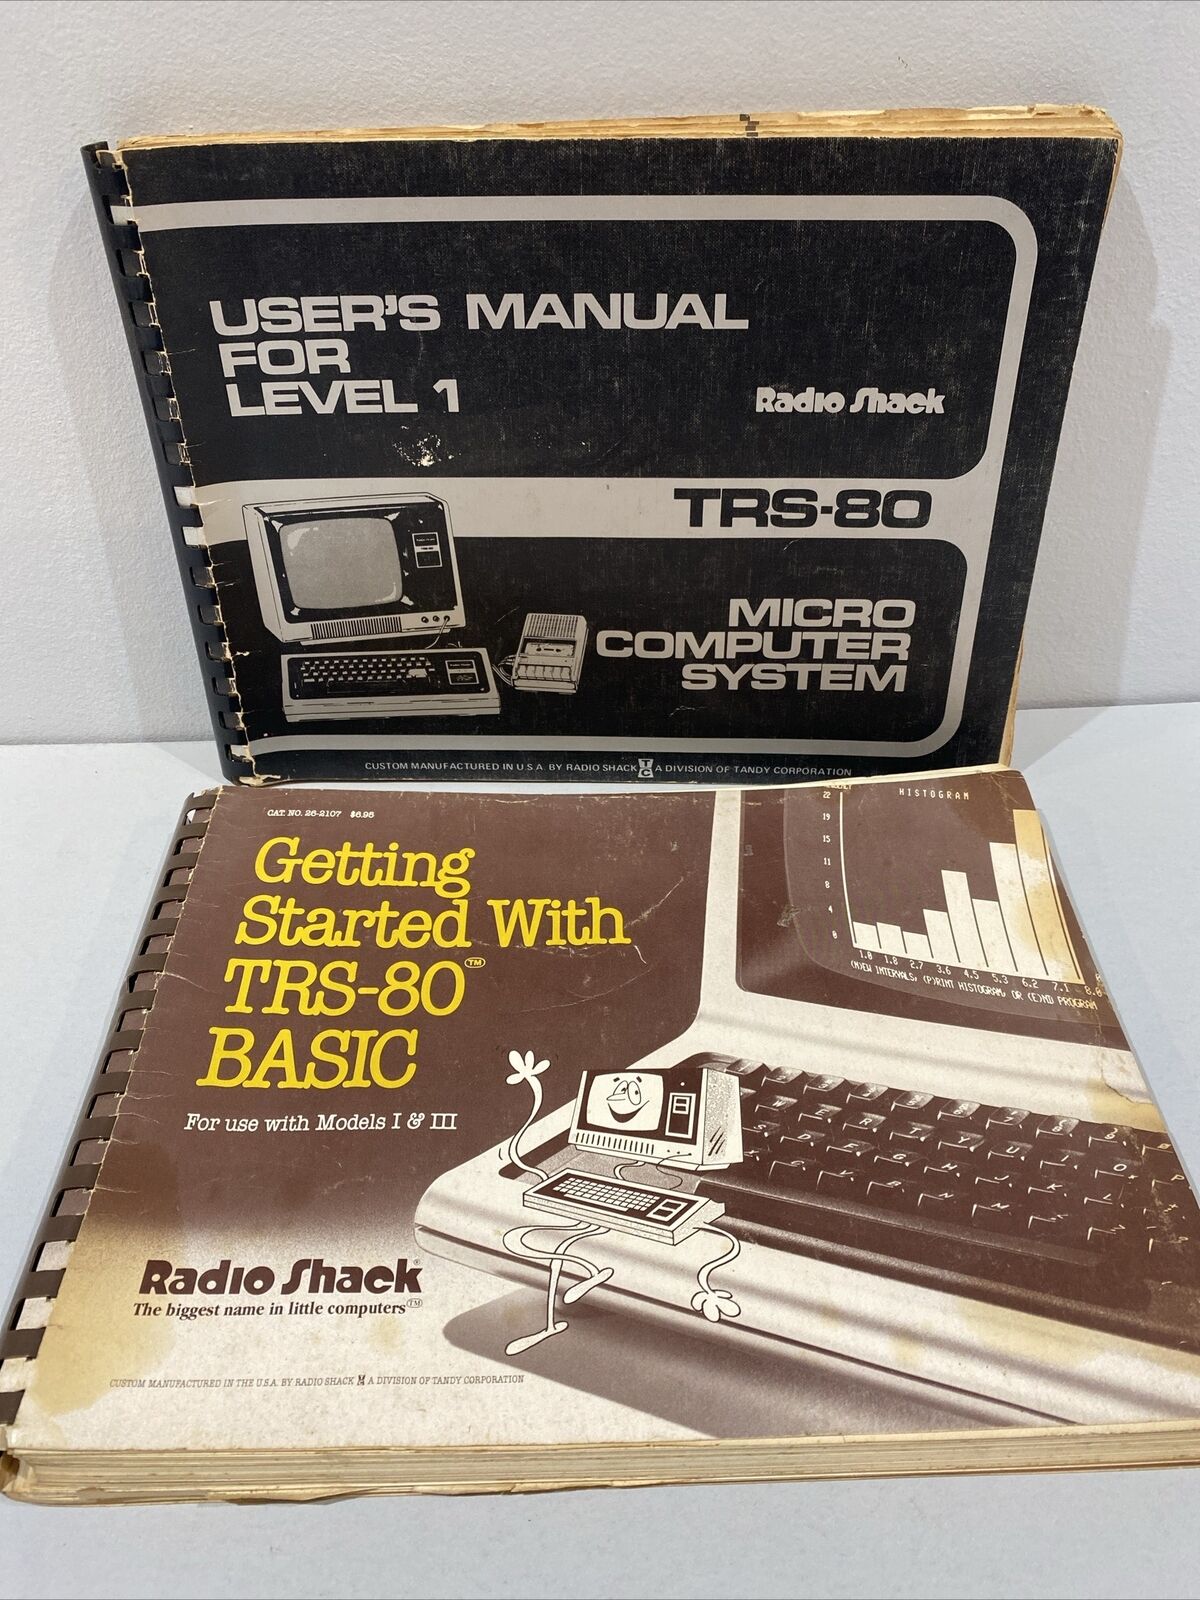 Radio Shack Getting Started with TRS-80 & Level 1 User Manual Set